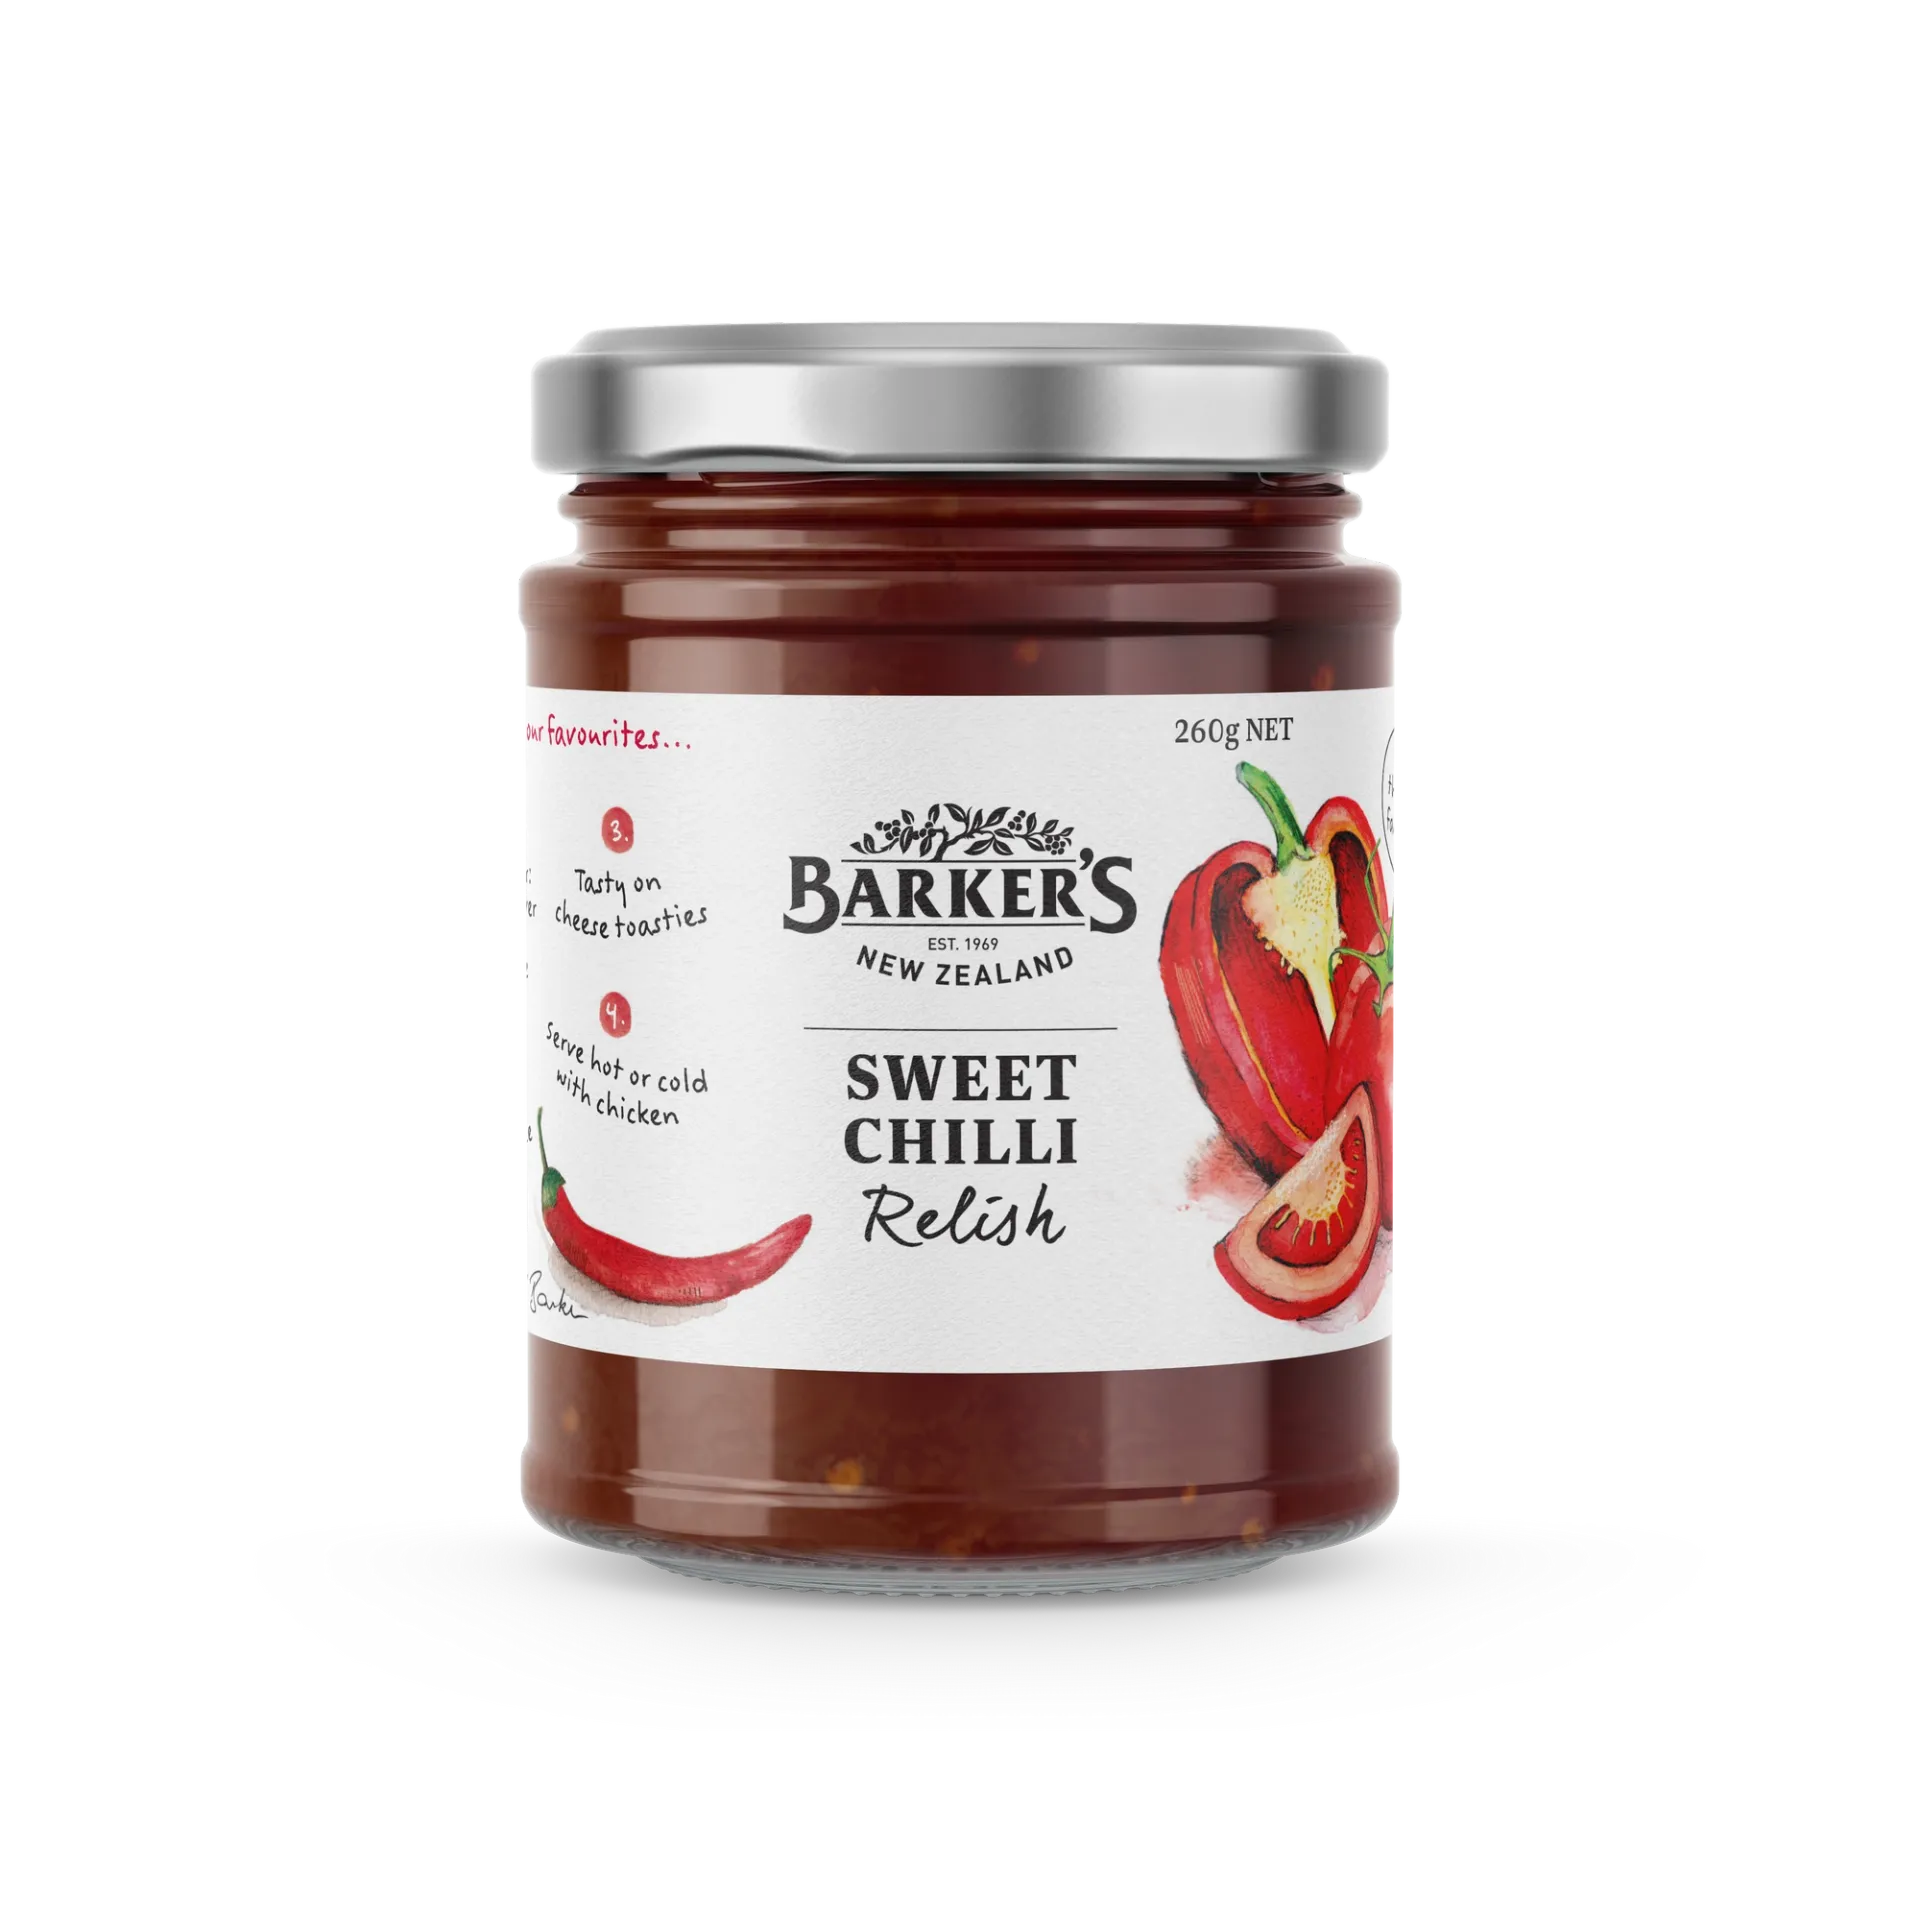 Barkers Relish Sweet Chilli 260g